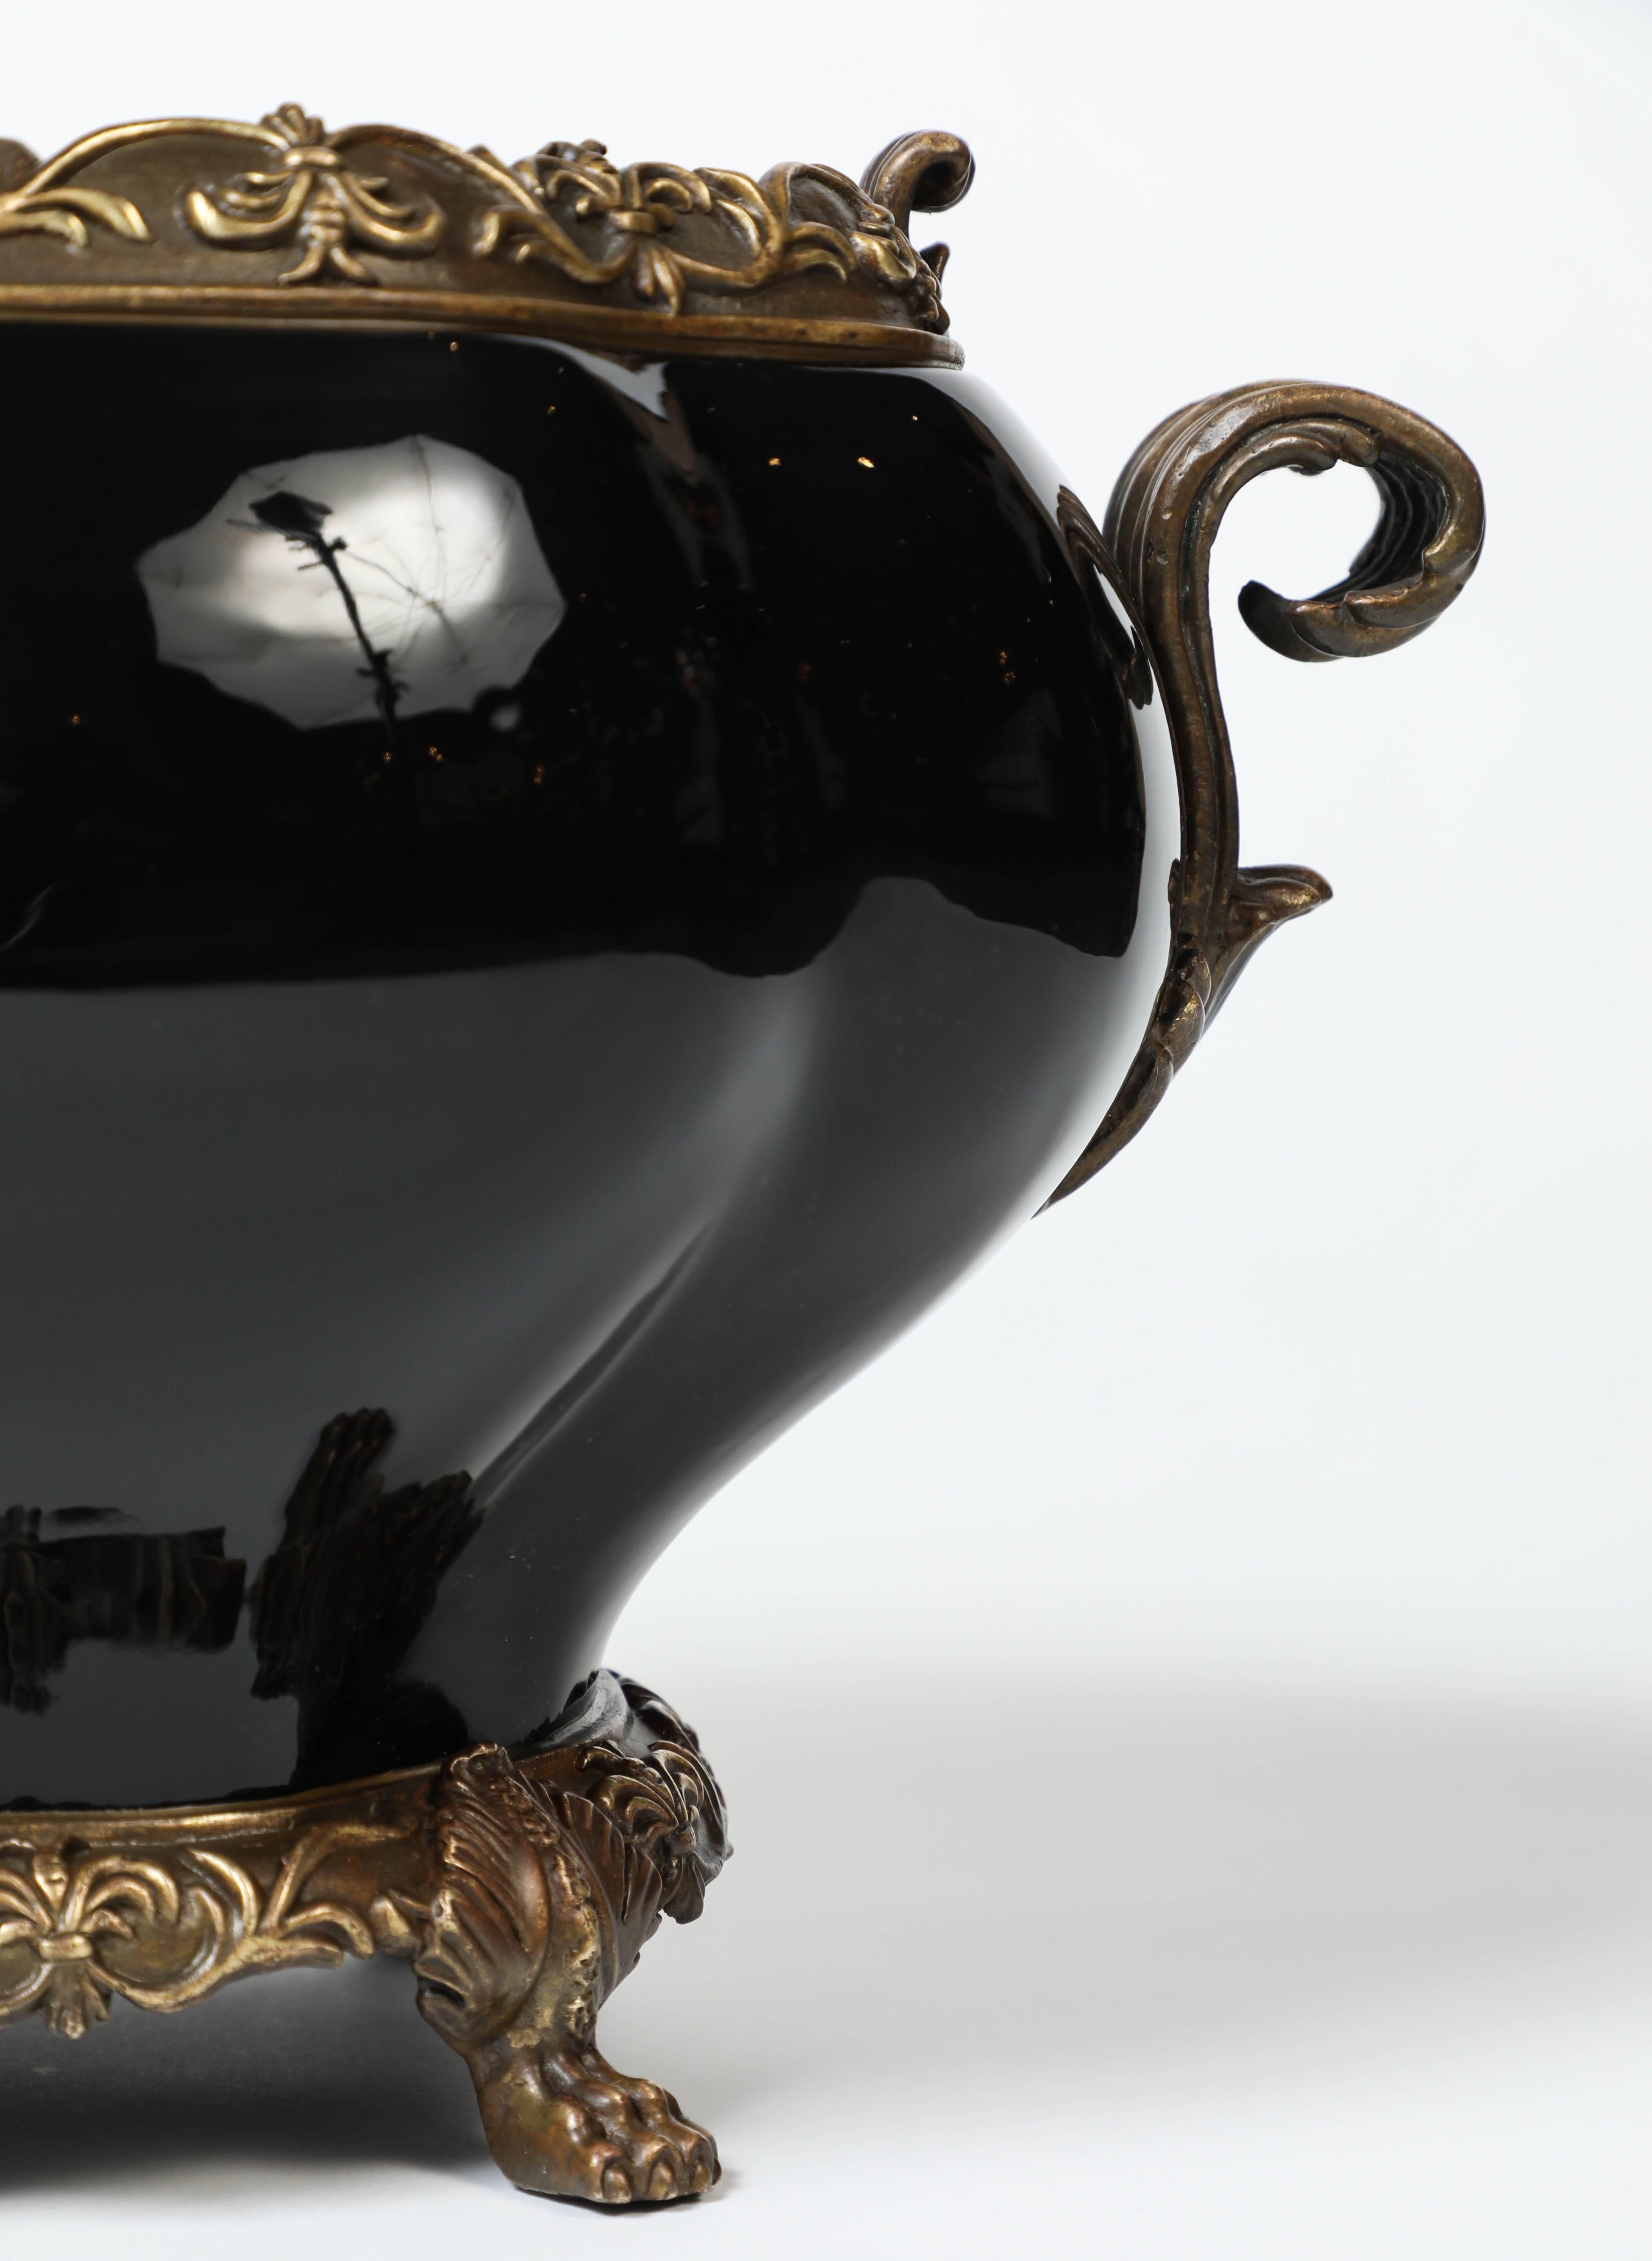 Brass Vintage Black Ceramic and Claw-Footed Compote / Tureen